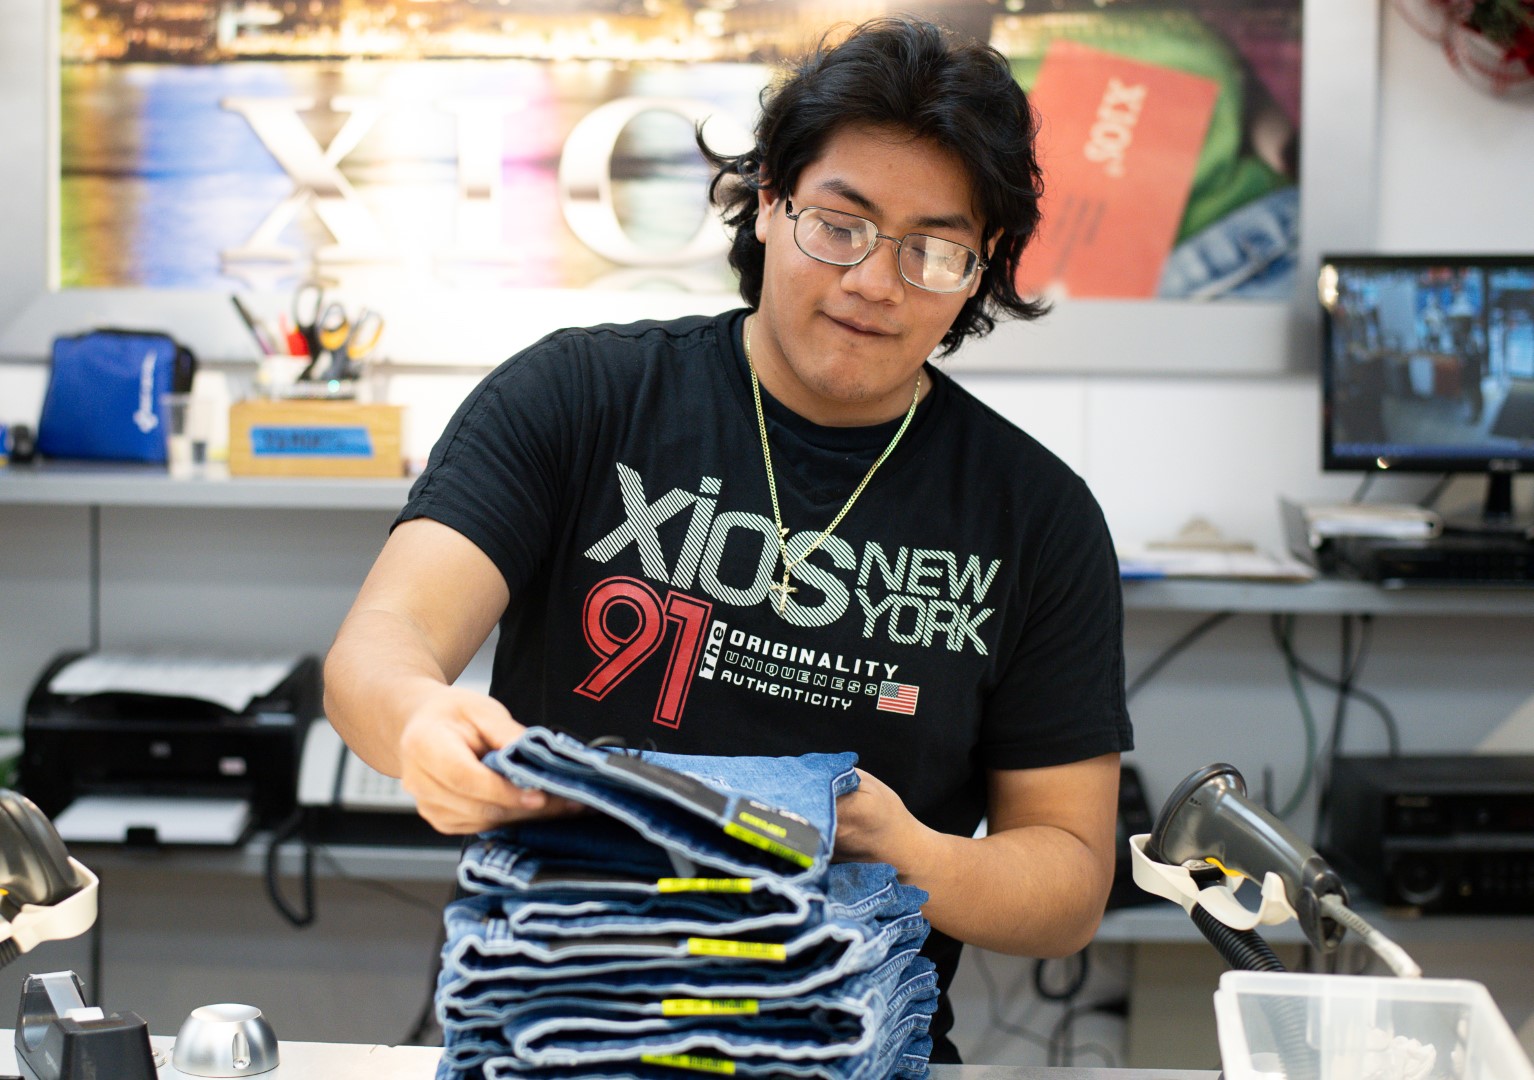 Young man in a black t-shirt stands in a workspace, holding a stack of folded jeans, with design tools and posters visible in the background.